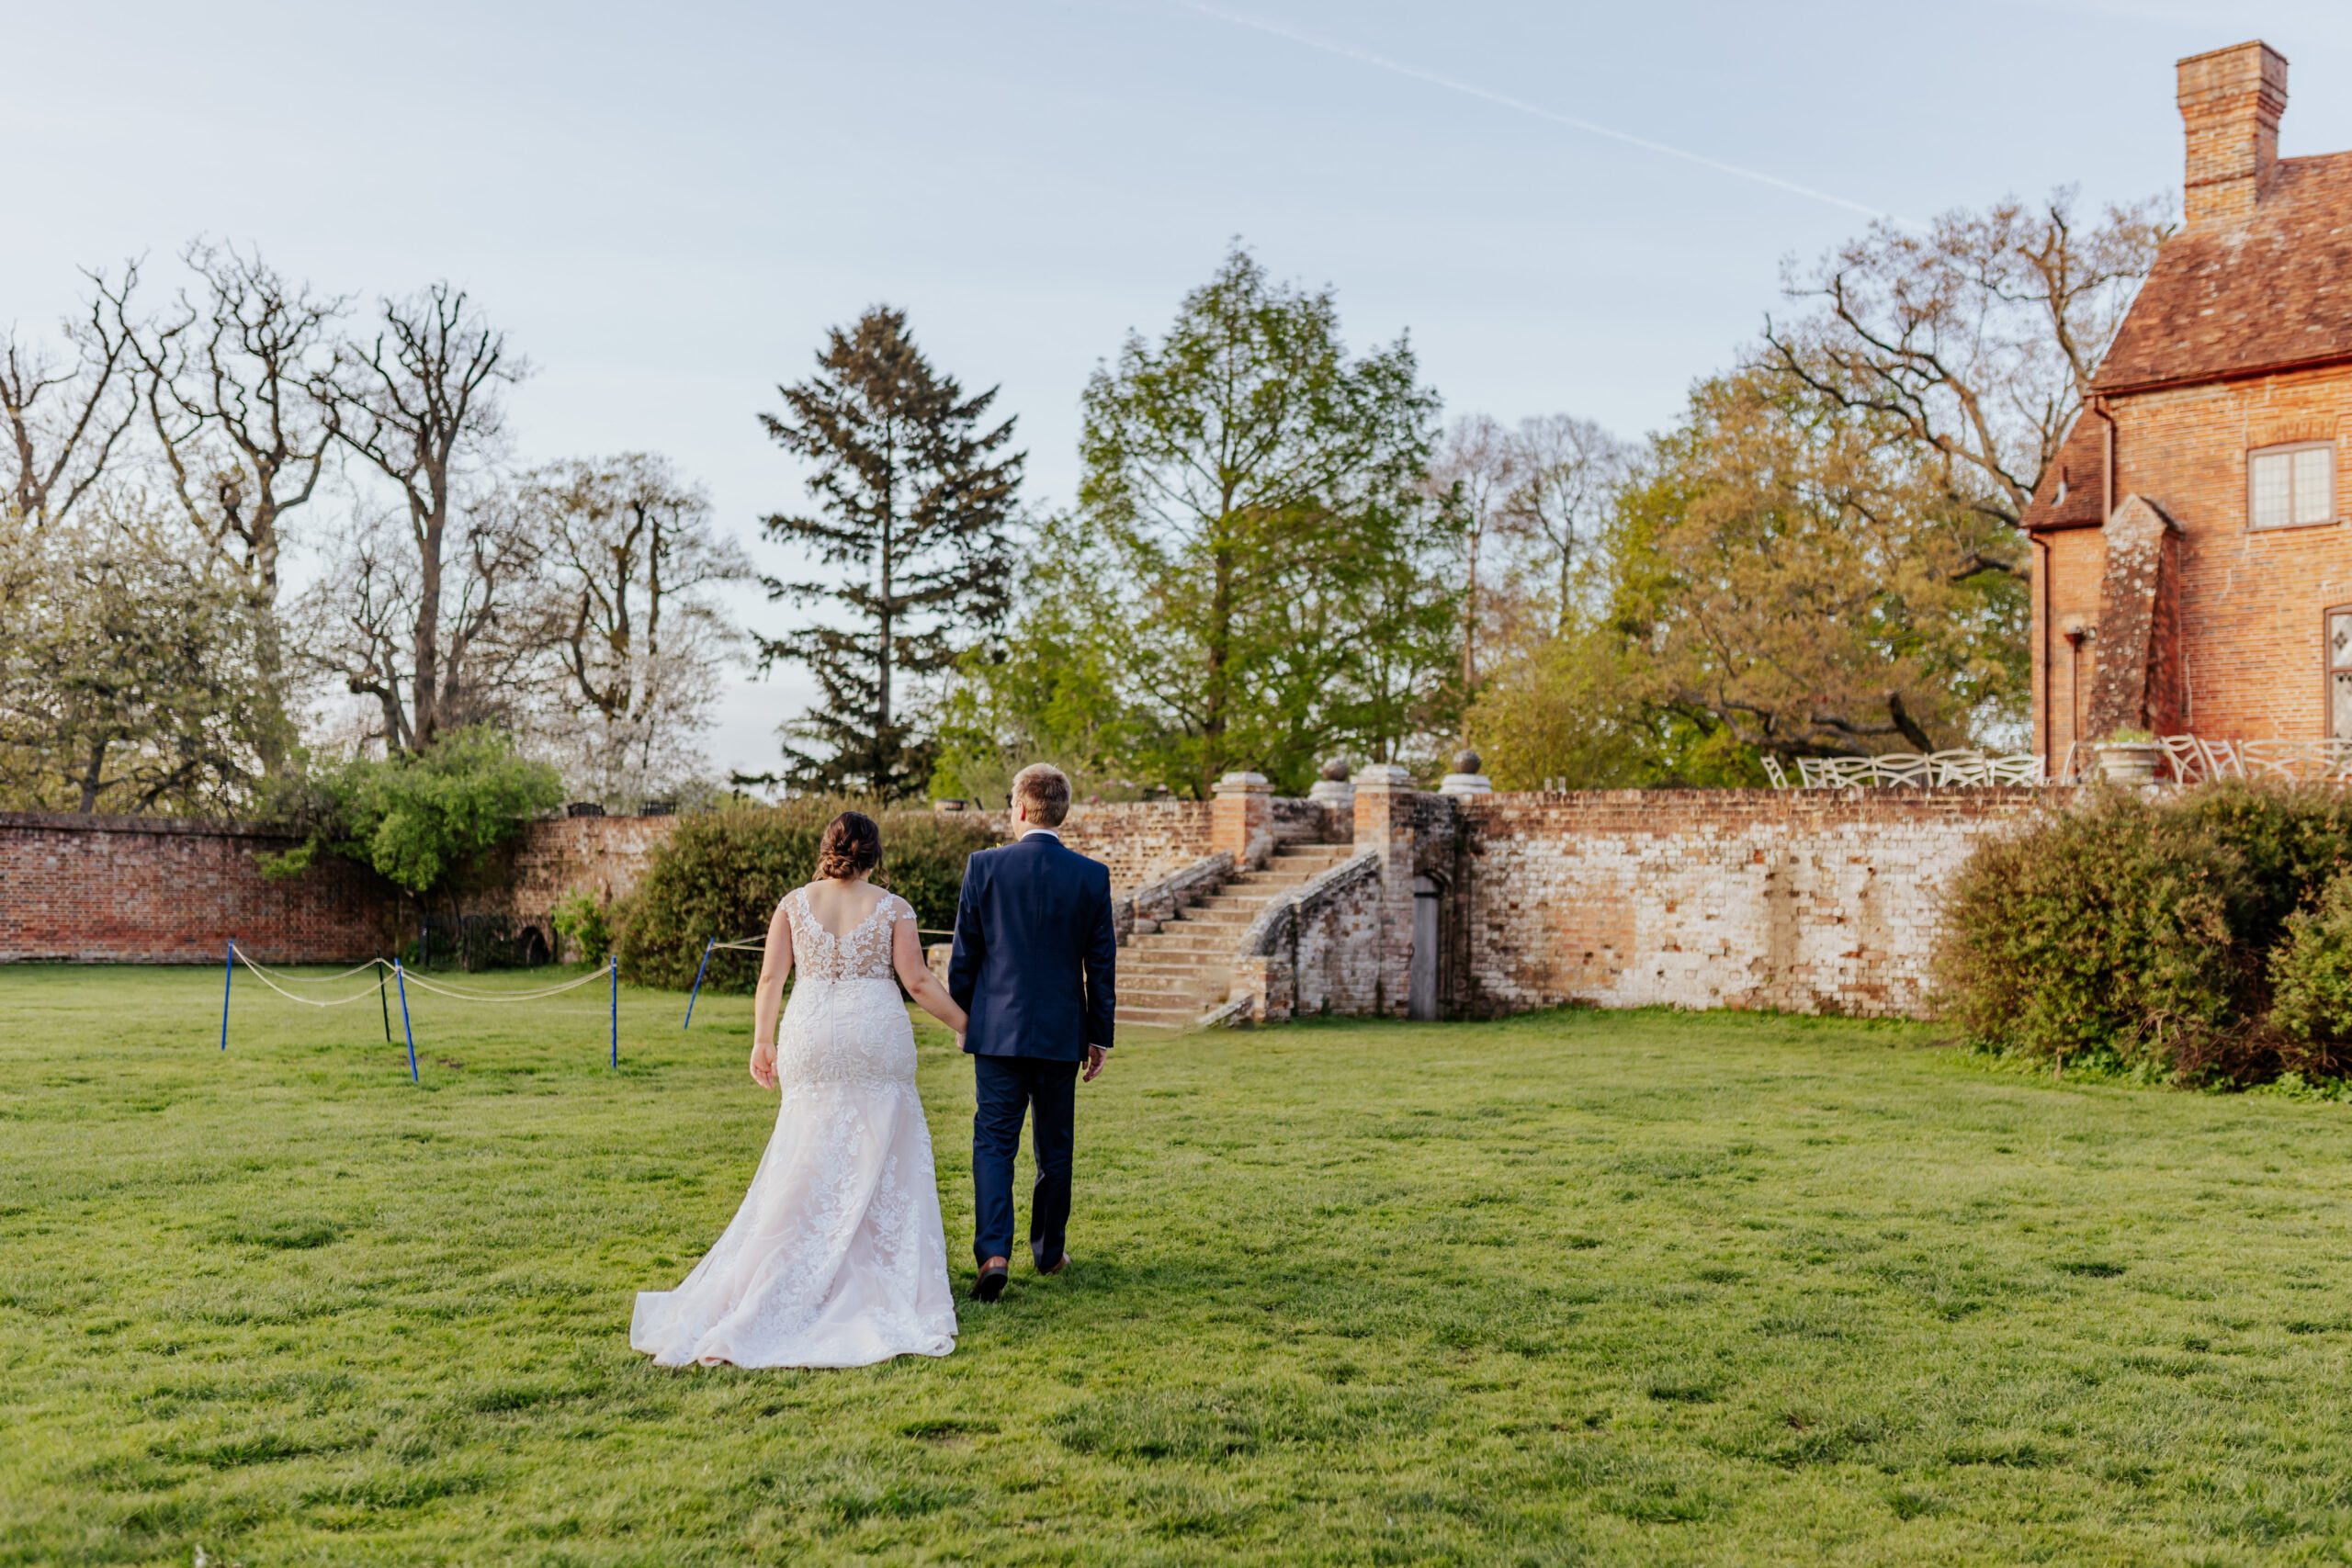 Bride and groom walk away, holding hands in the sunken garden at sunset at Ufton Court